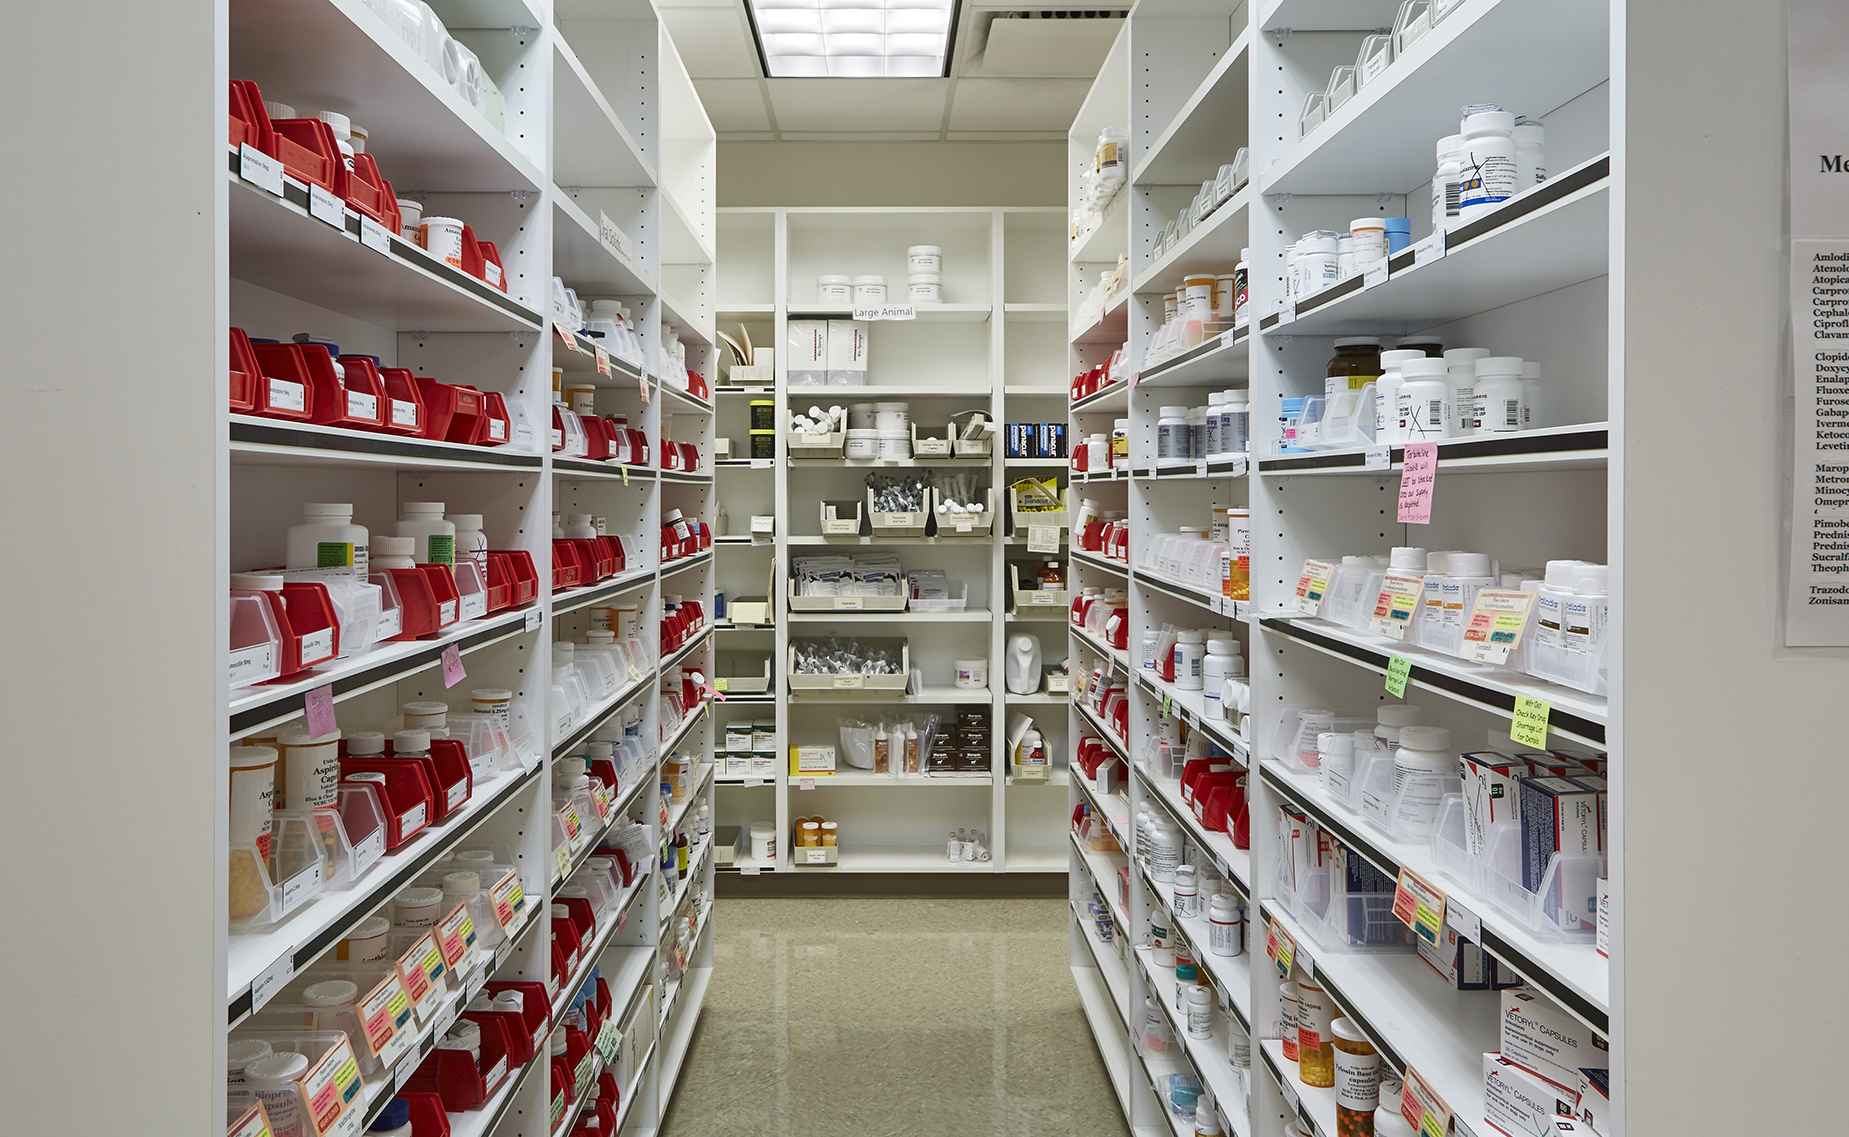 Rows of medications on shelves